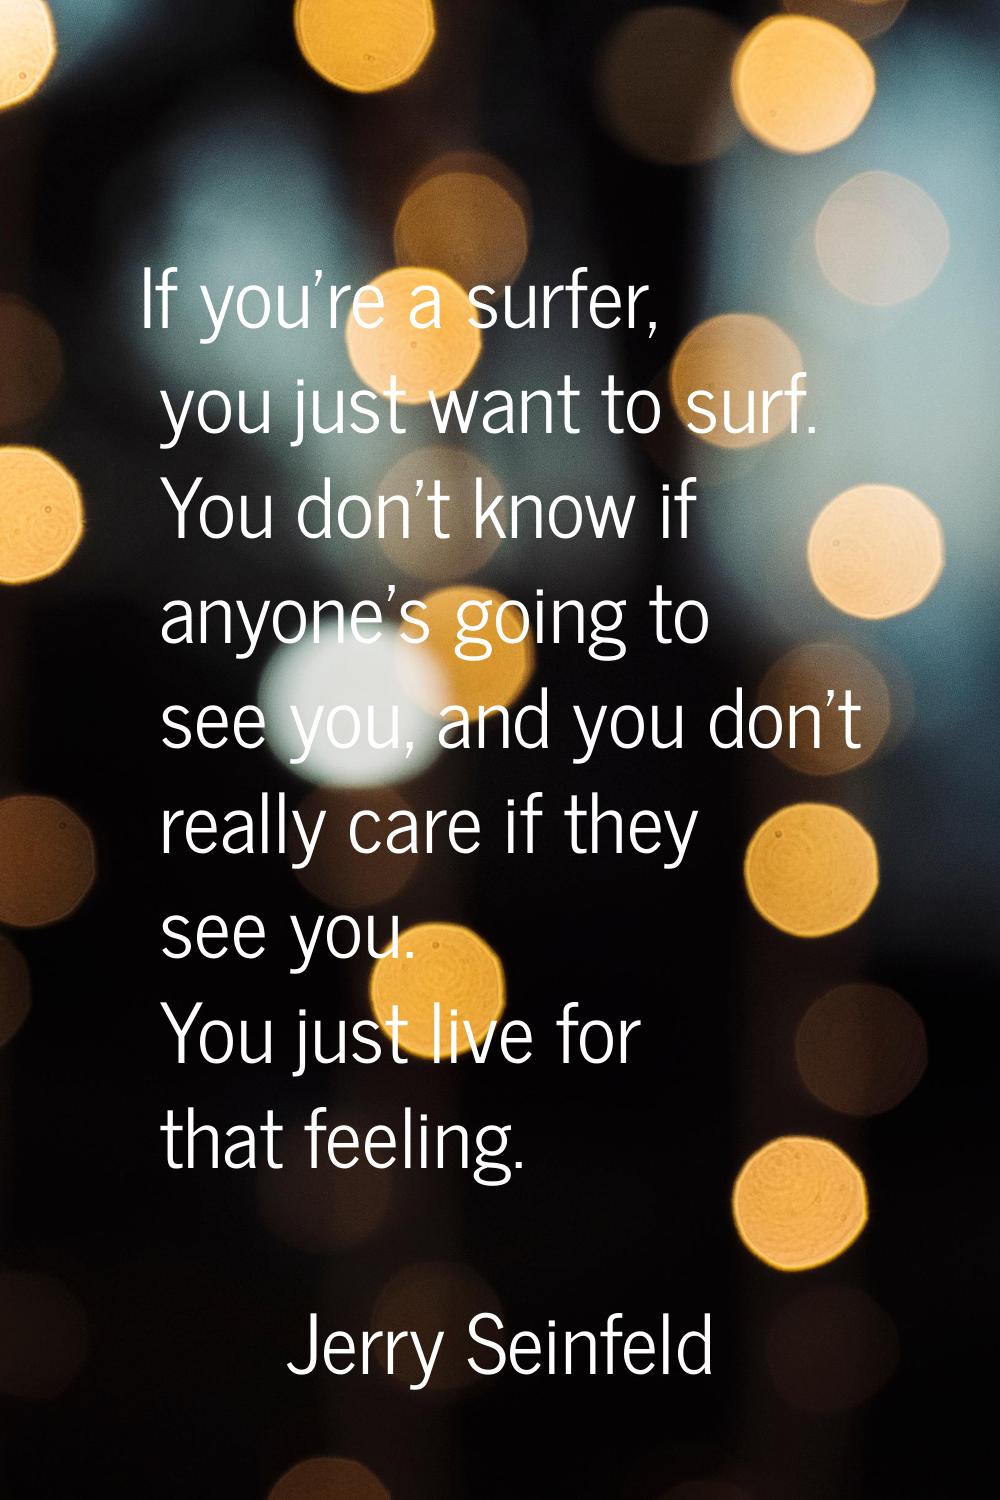 If you're a surfer, you just want to surf. You don't know if anyone's going to see you, and you don